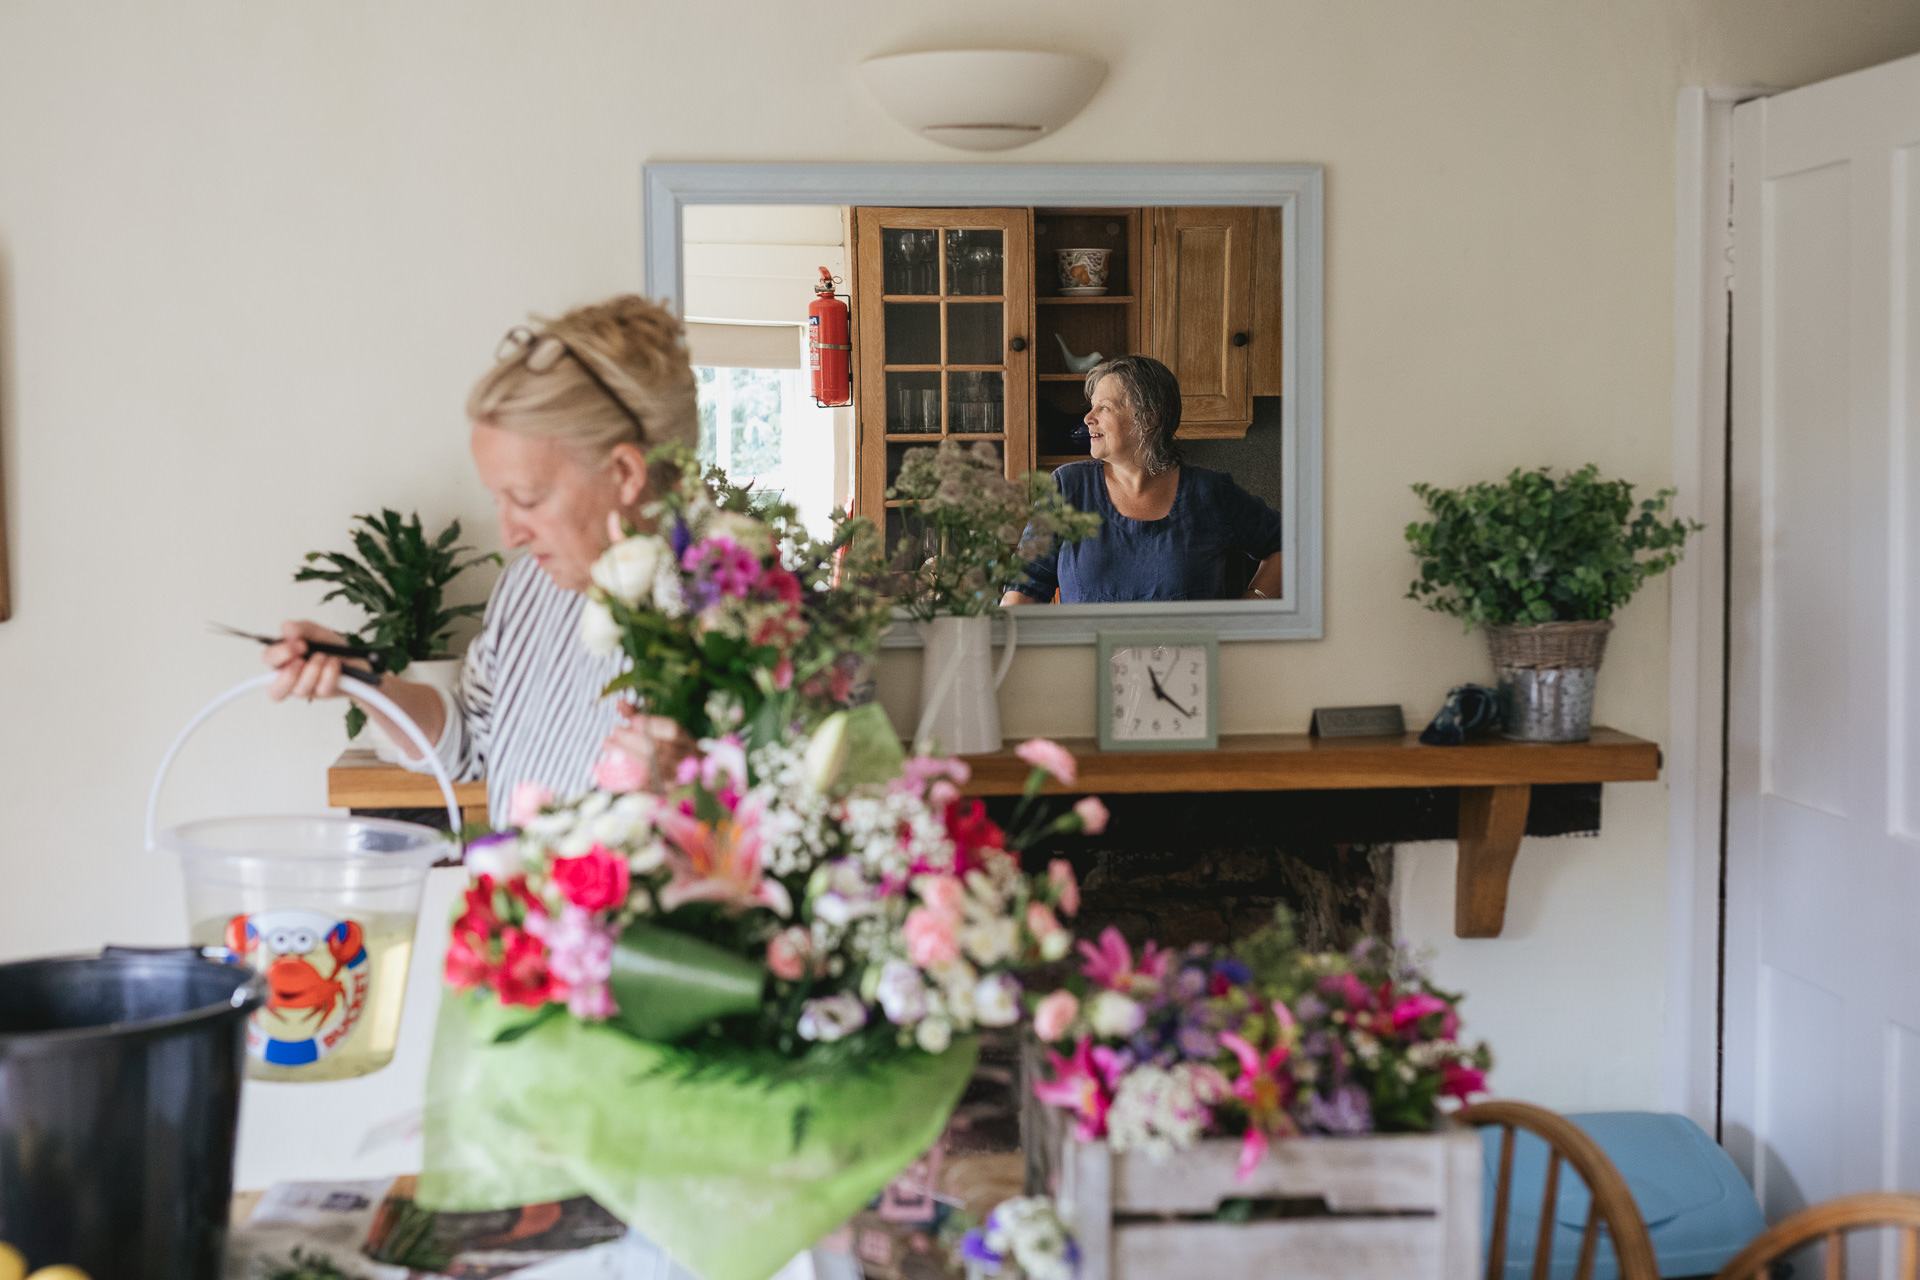 Florist arranging flowers with woman reflected in mirror